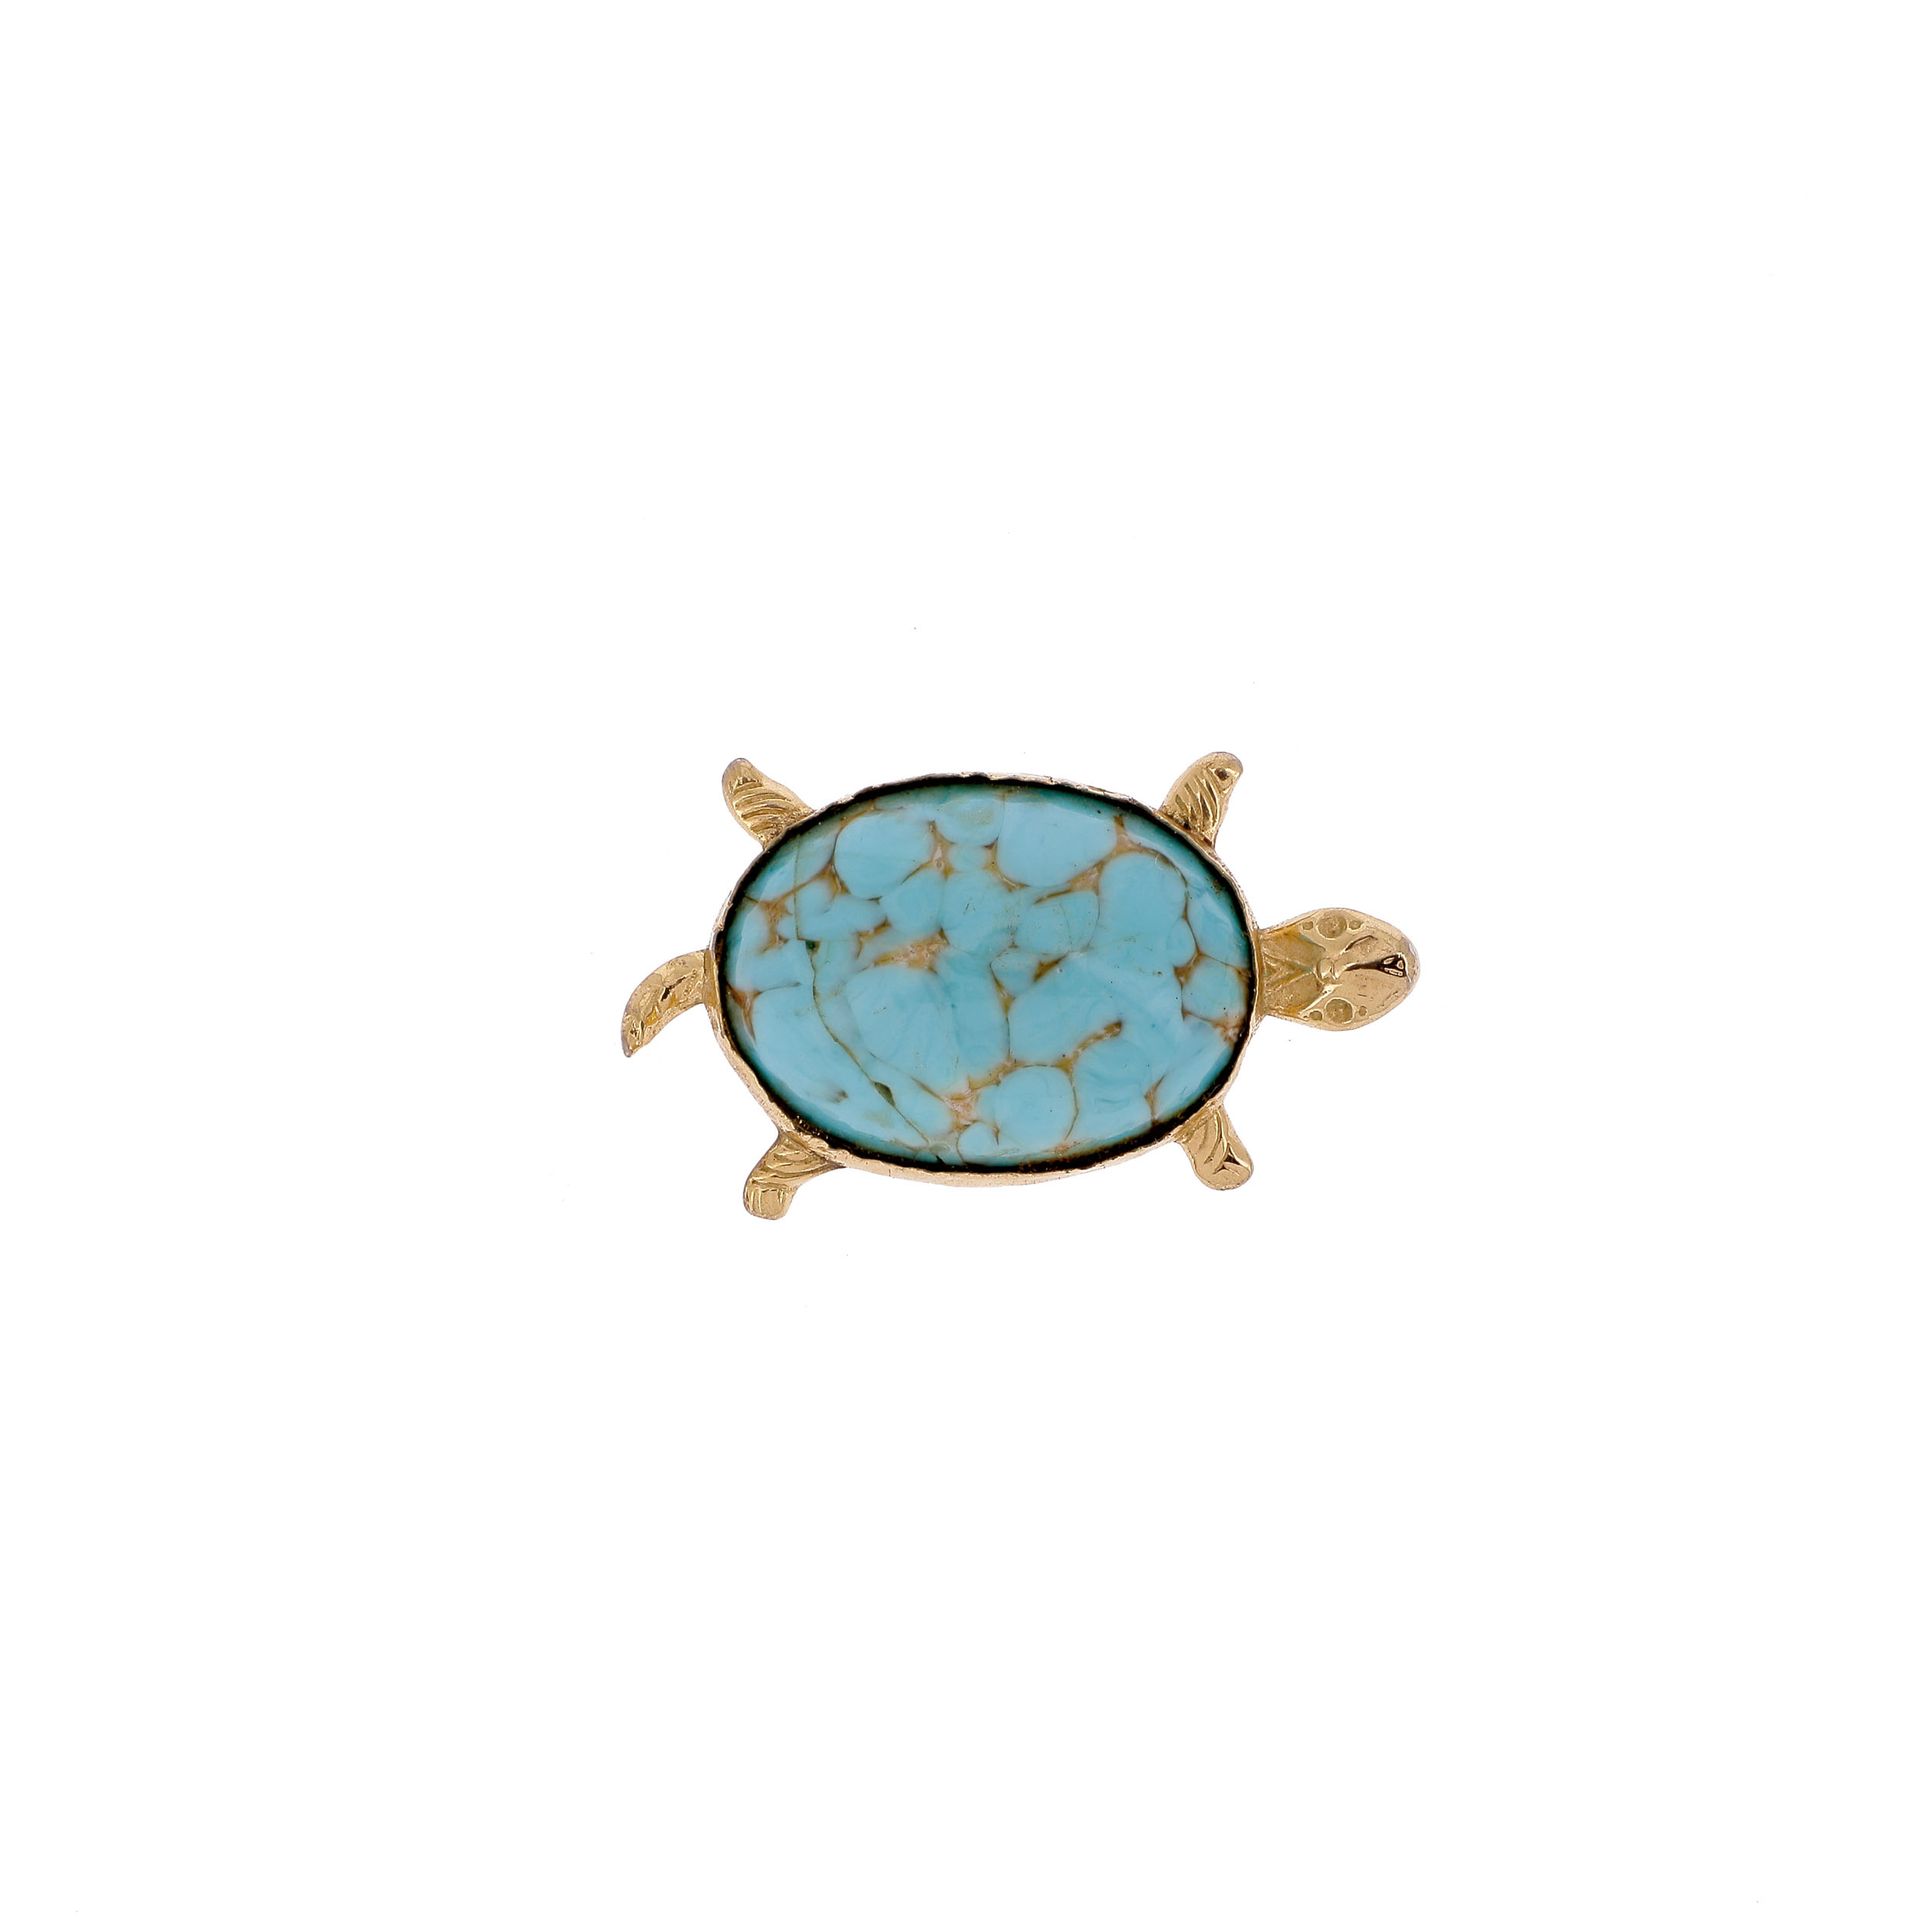 Null TURTLE BROOCH

in yellow gold, the carapace in turquoise cabochon. 

A turq&hellip;